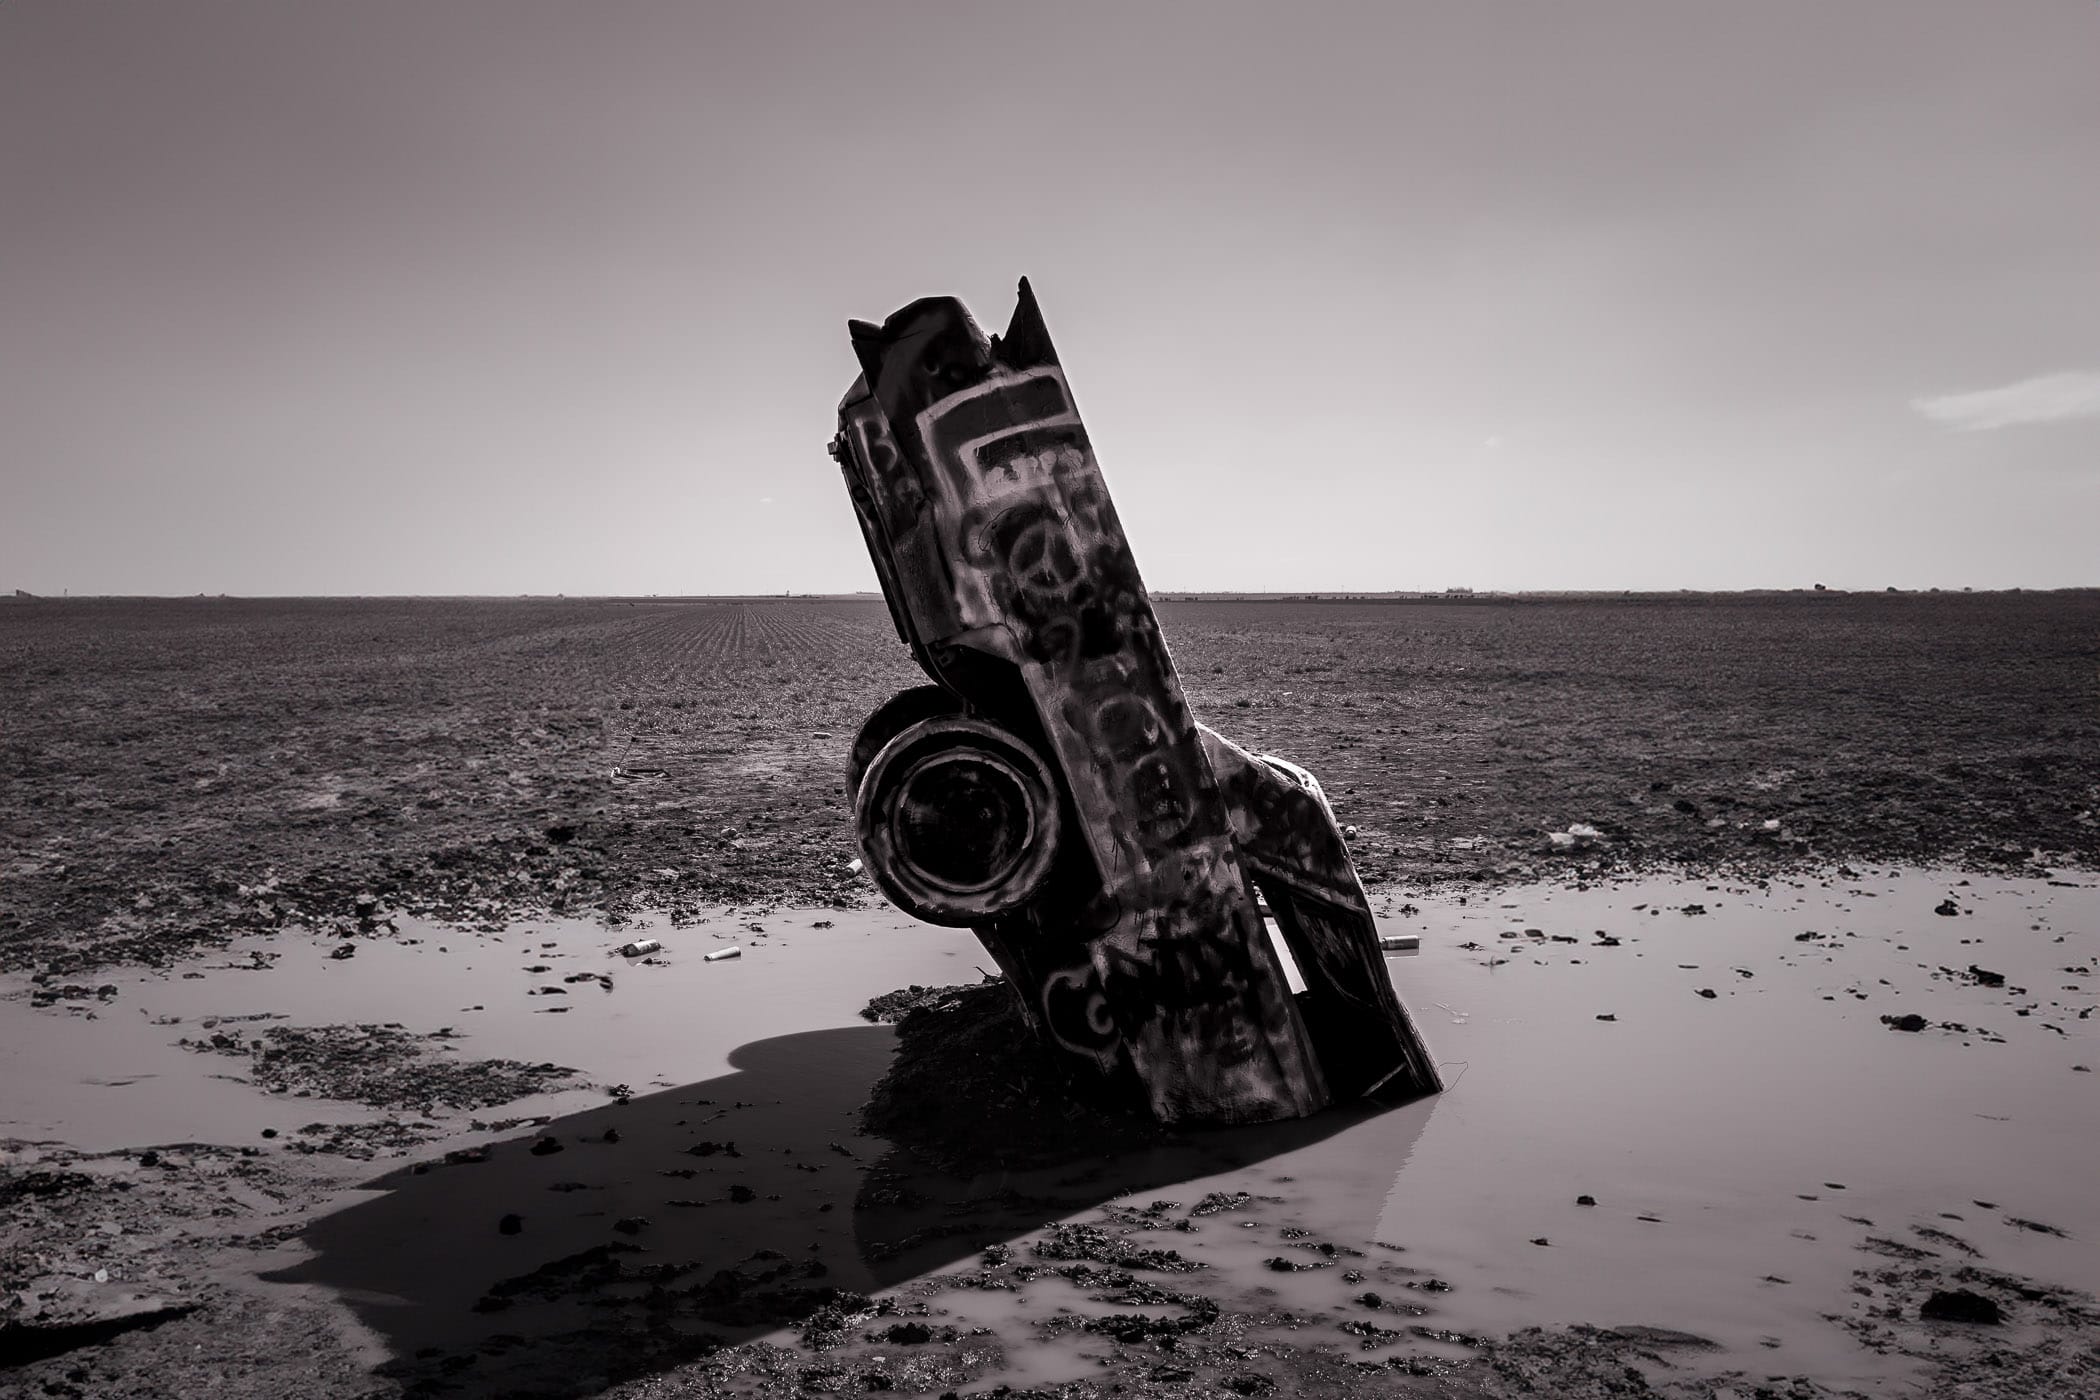 One of the ten Cadillacs at Amarillo, Texas’ Cadillac Ranch, stuck nose-first in mud.